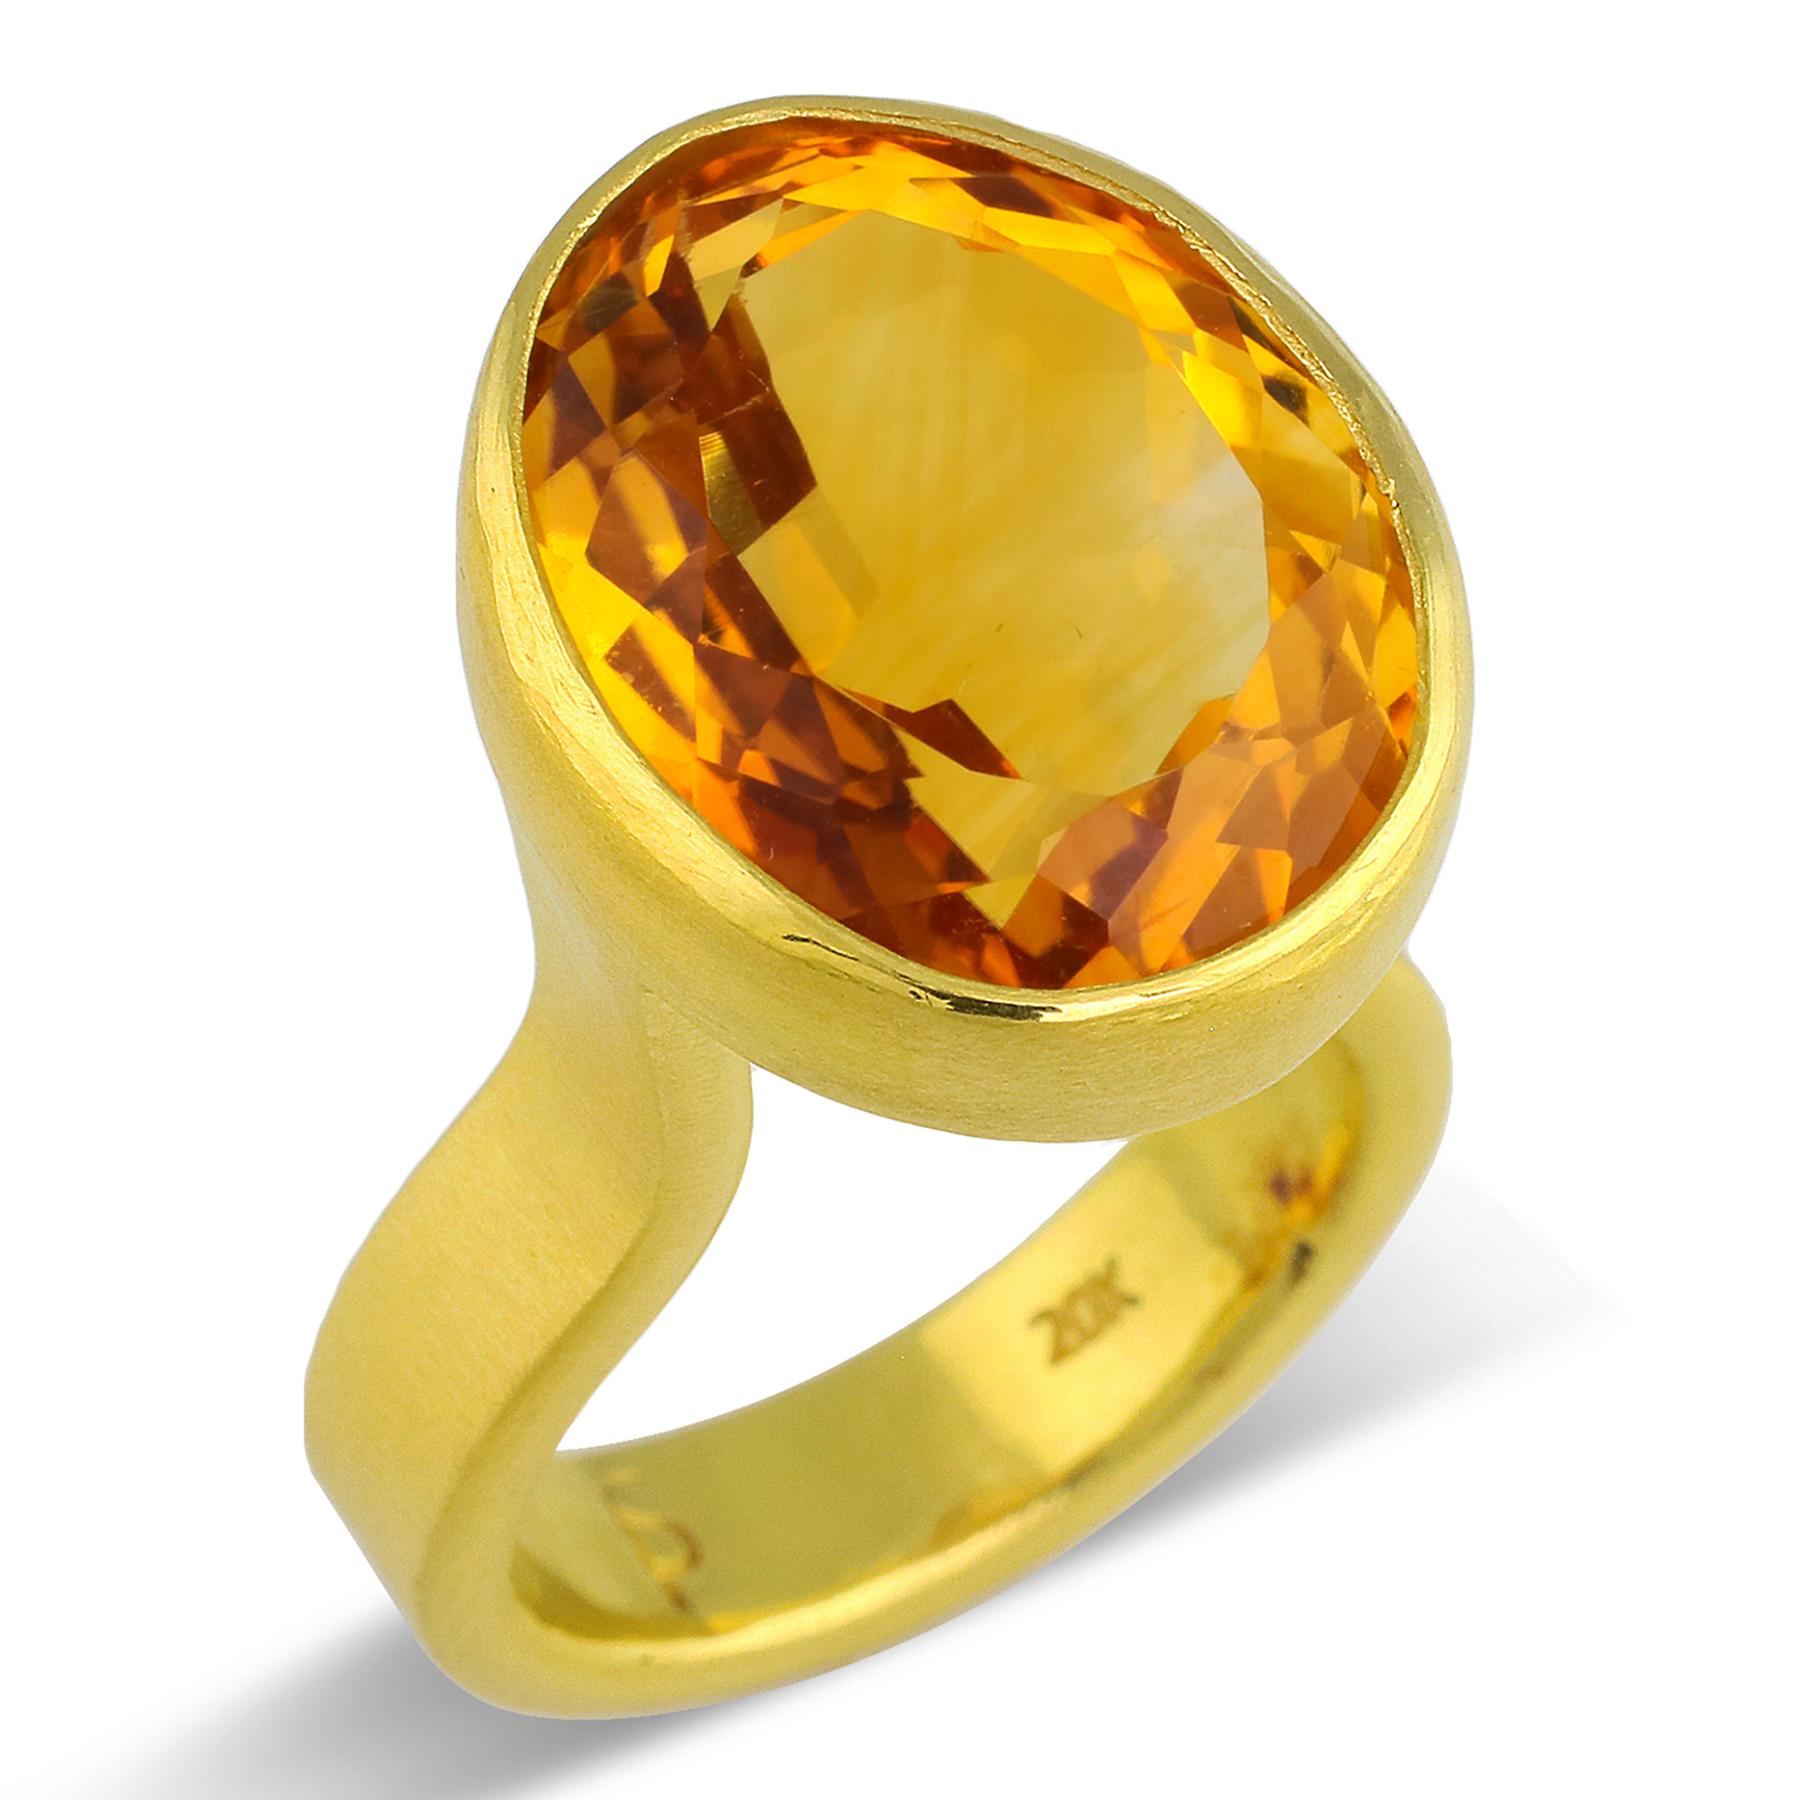 Artisan PHILIPPE SPENCER 14.04 Ct. Gold Citrine in 22K and 20K Gold Statement Ring